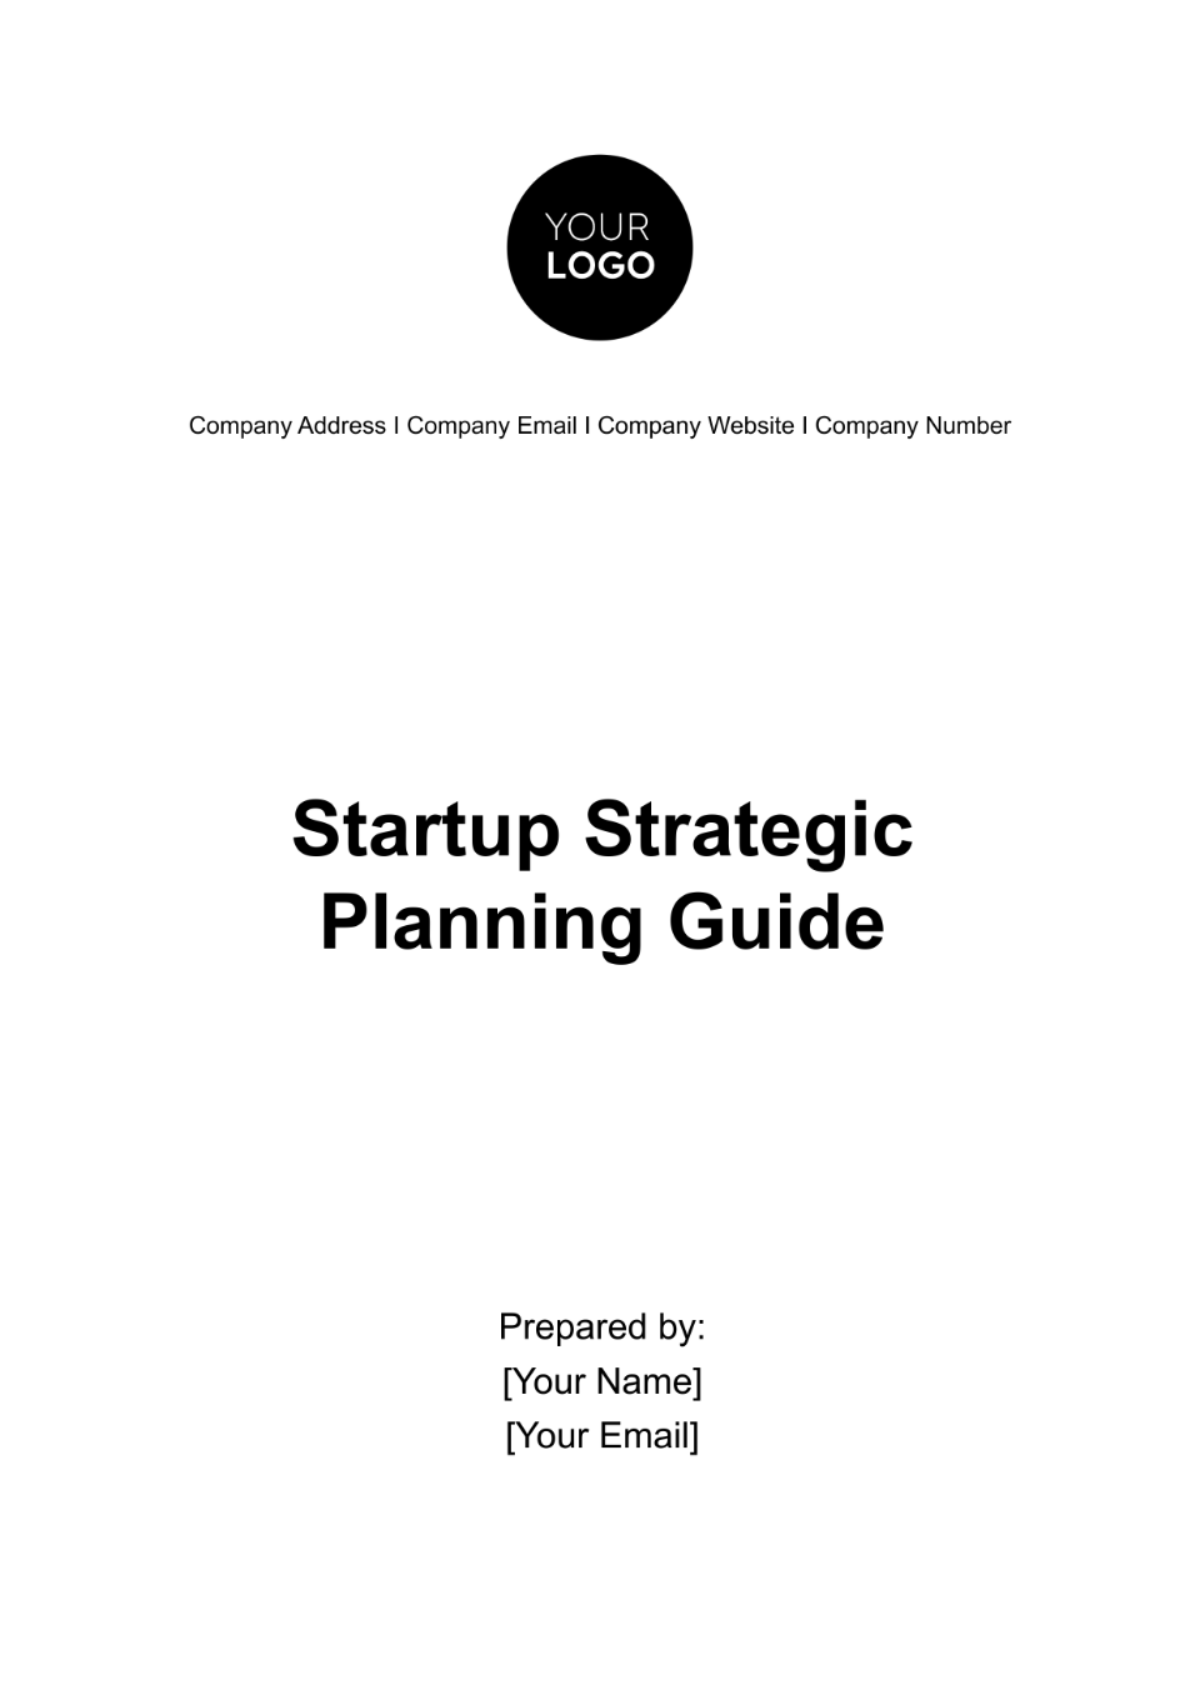 Startup Strategic Planning Guide Template